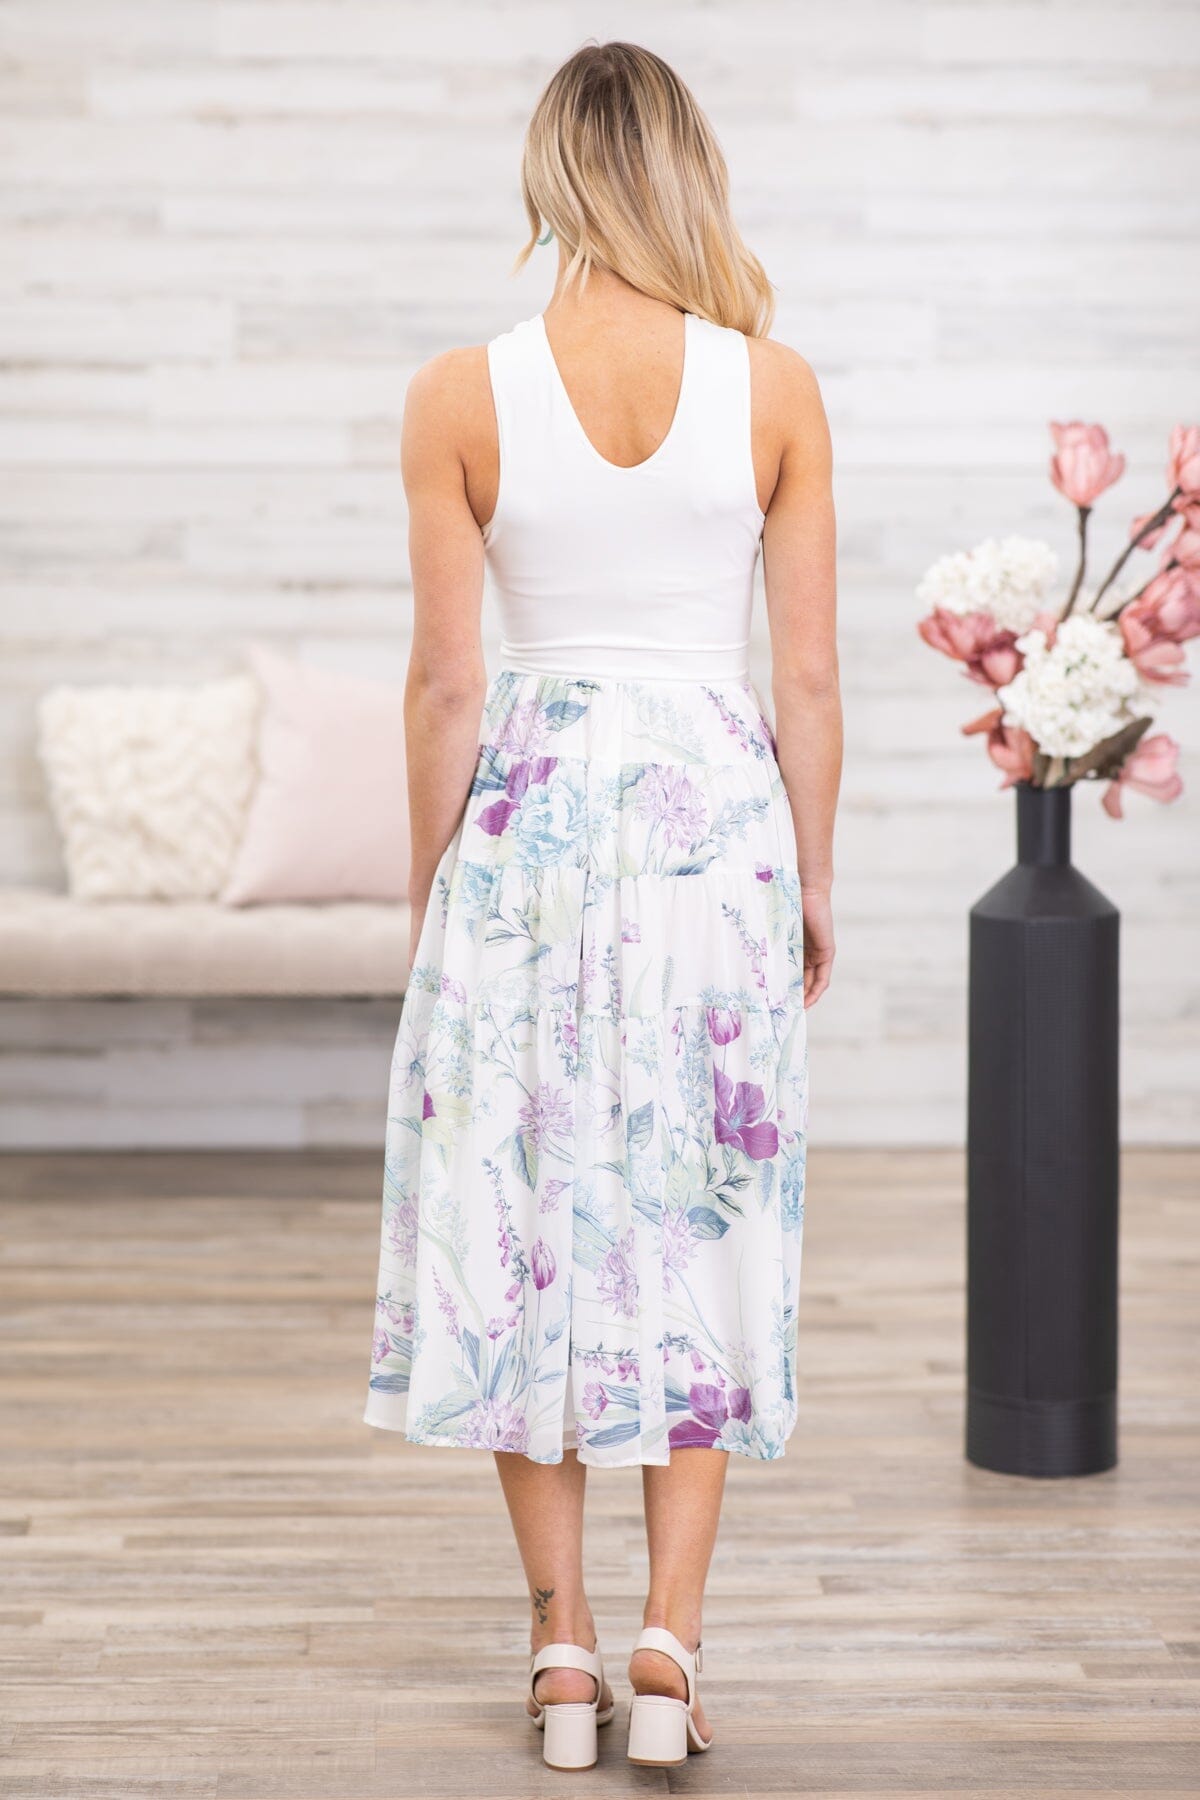 White Multicolor Halter Top Floral Skirt Dress - Filly Flair